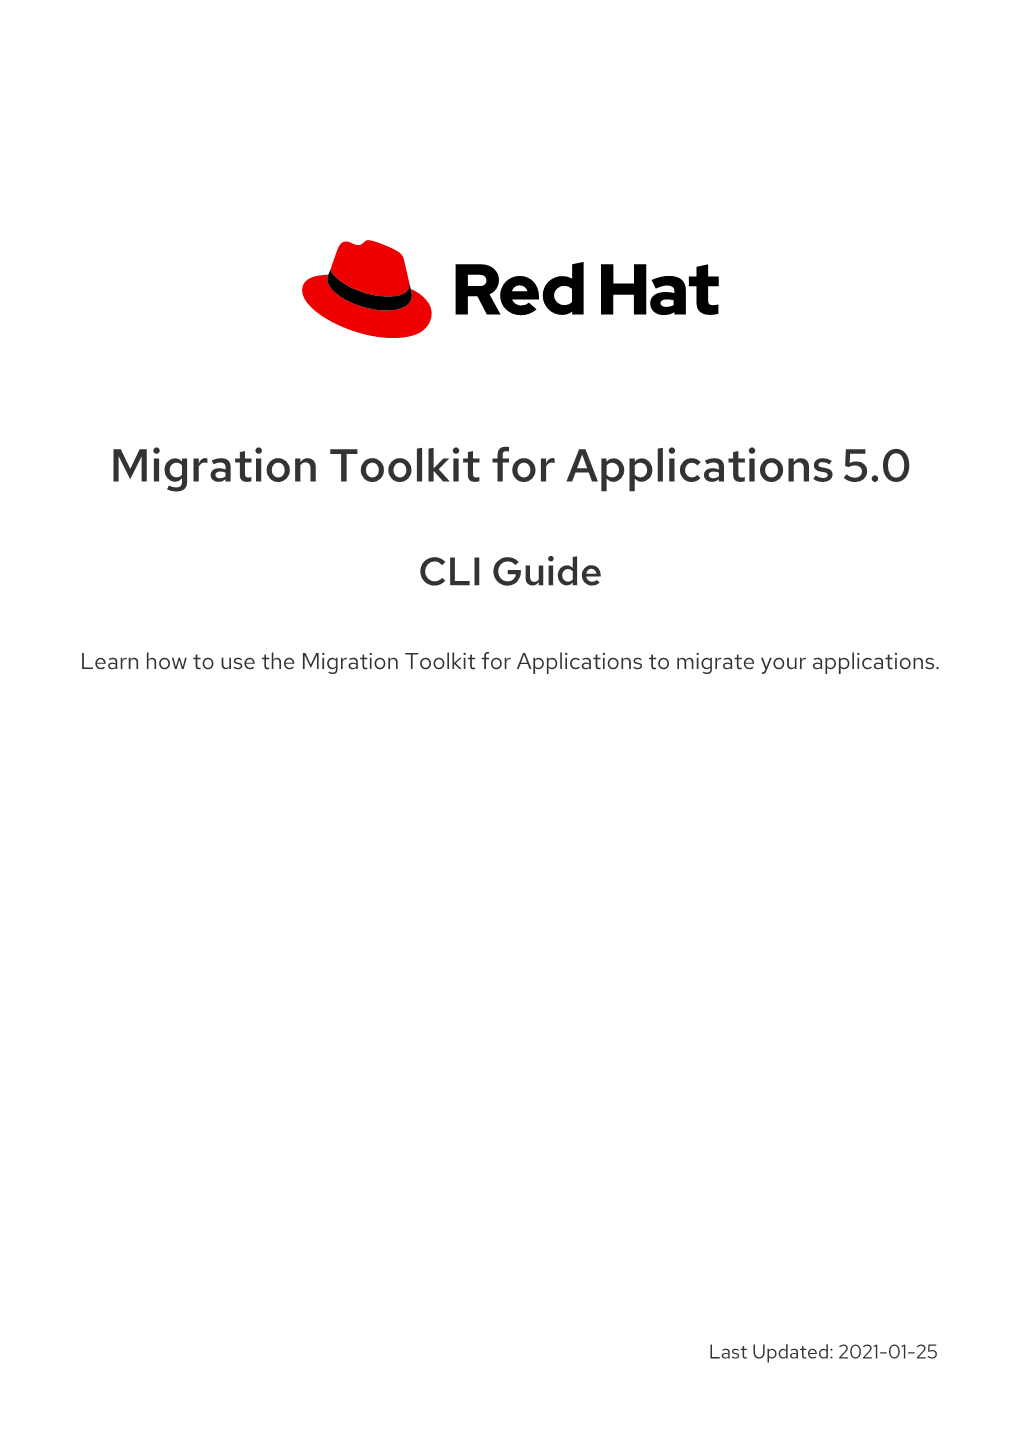 Migration Toolkit for Applications 5.0 CLI Guide